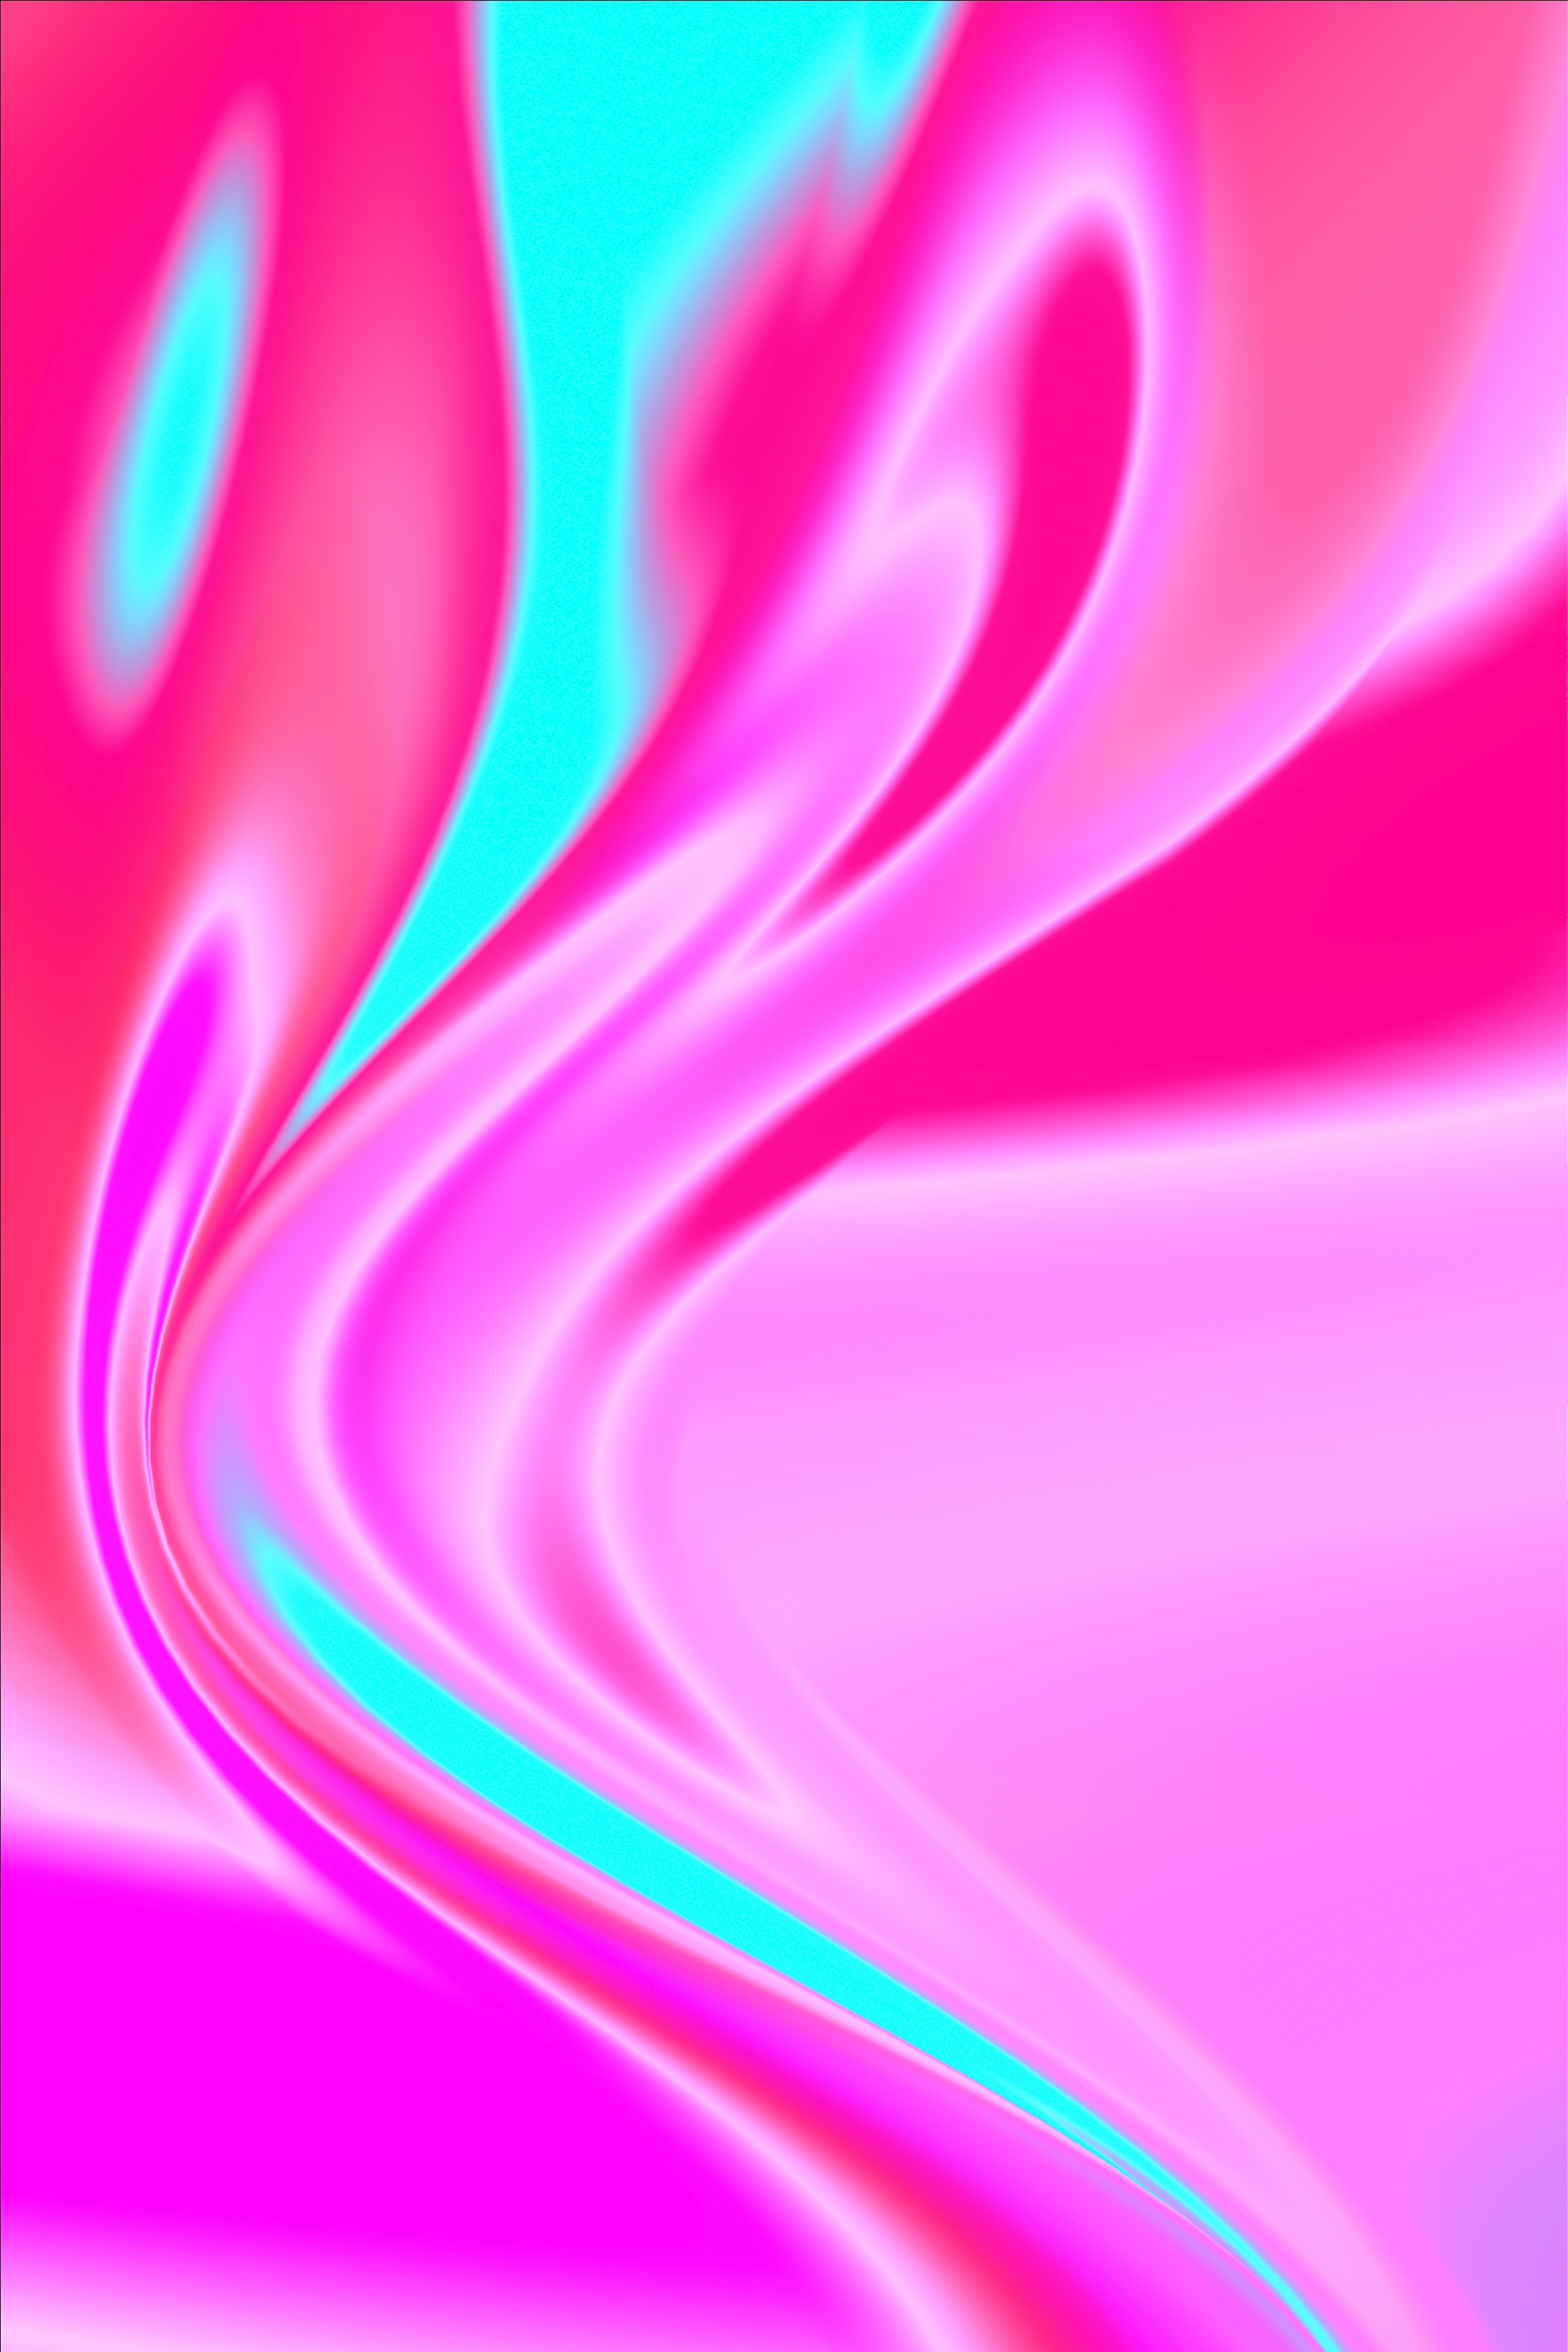 wavy, pink, mixing, raised, abstract, blue, relief